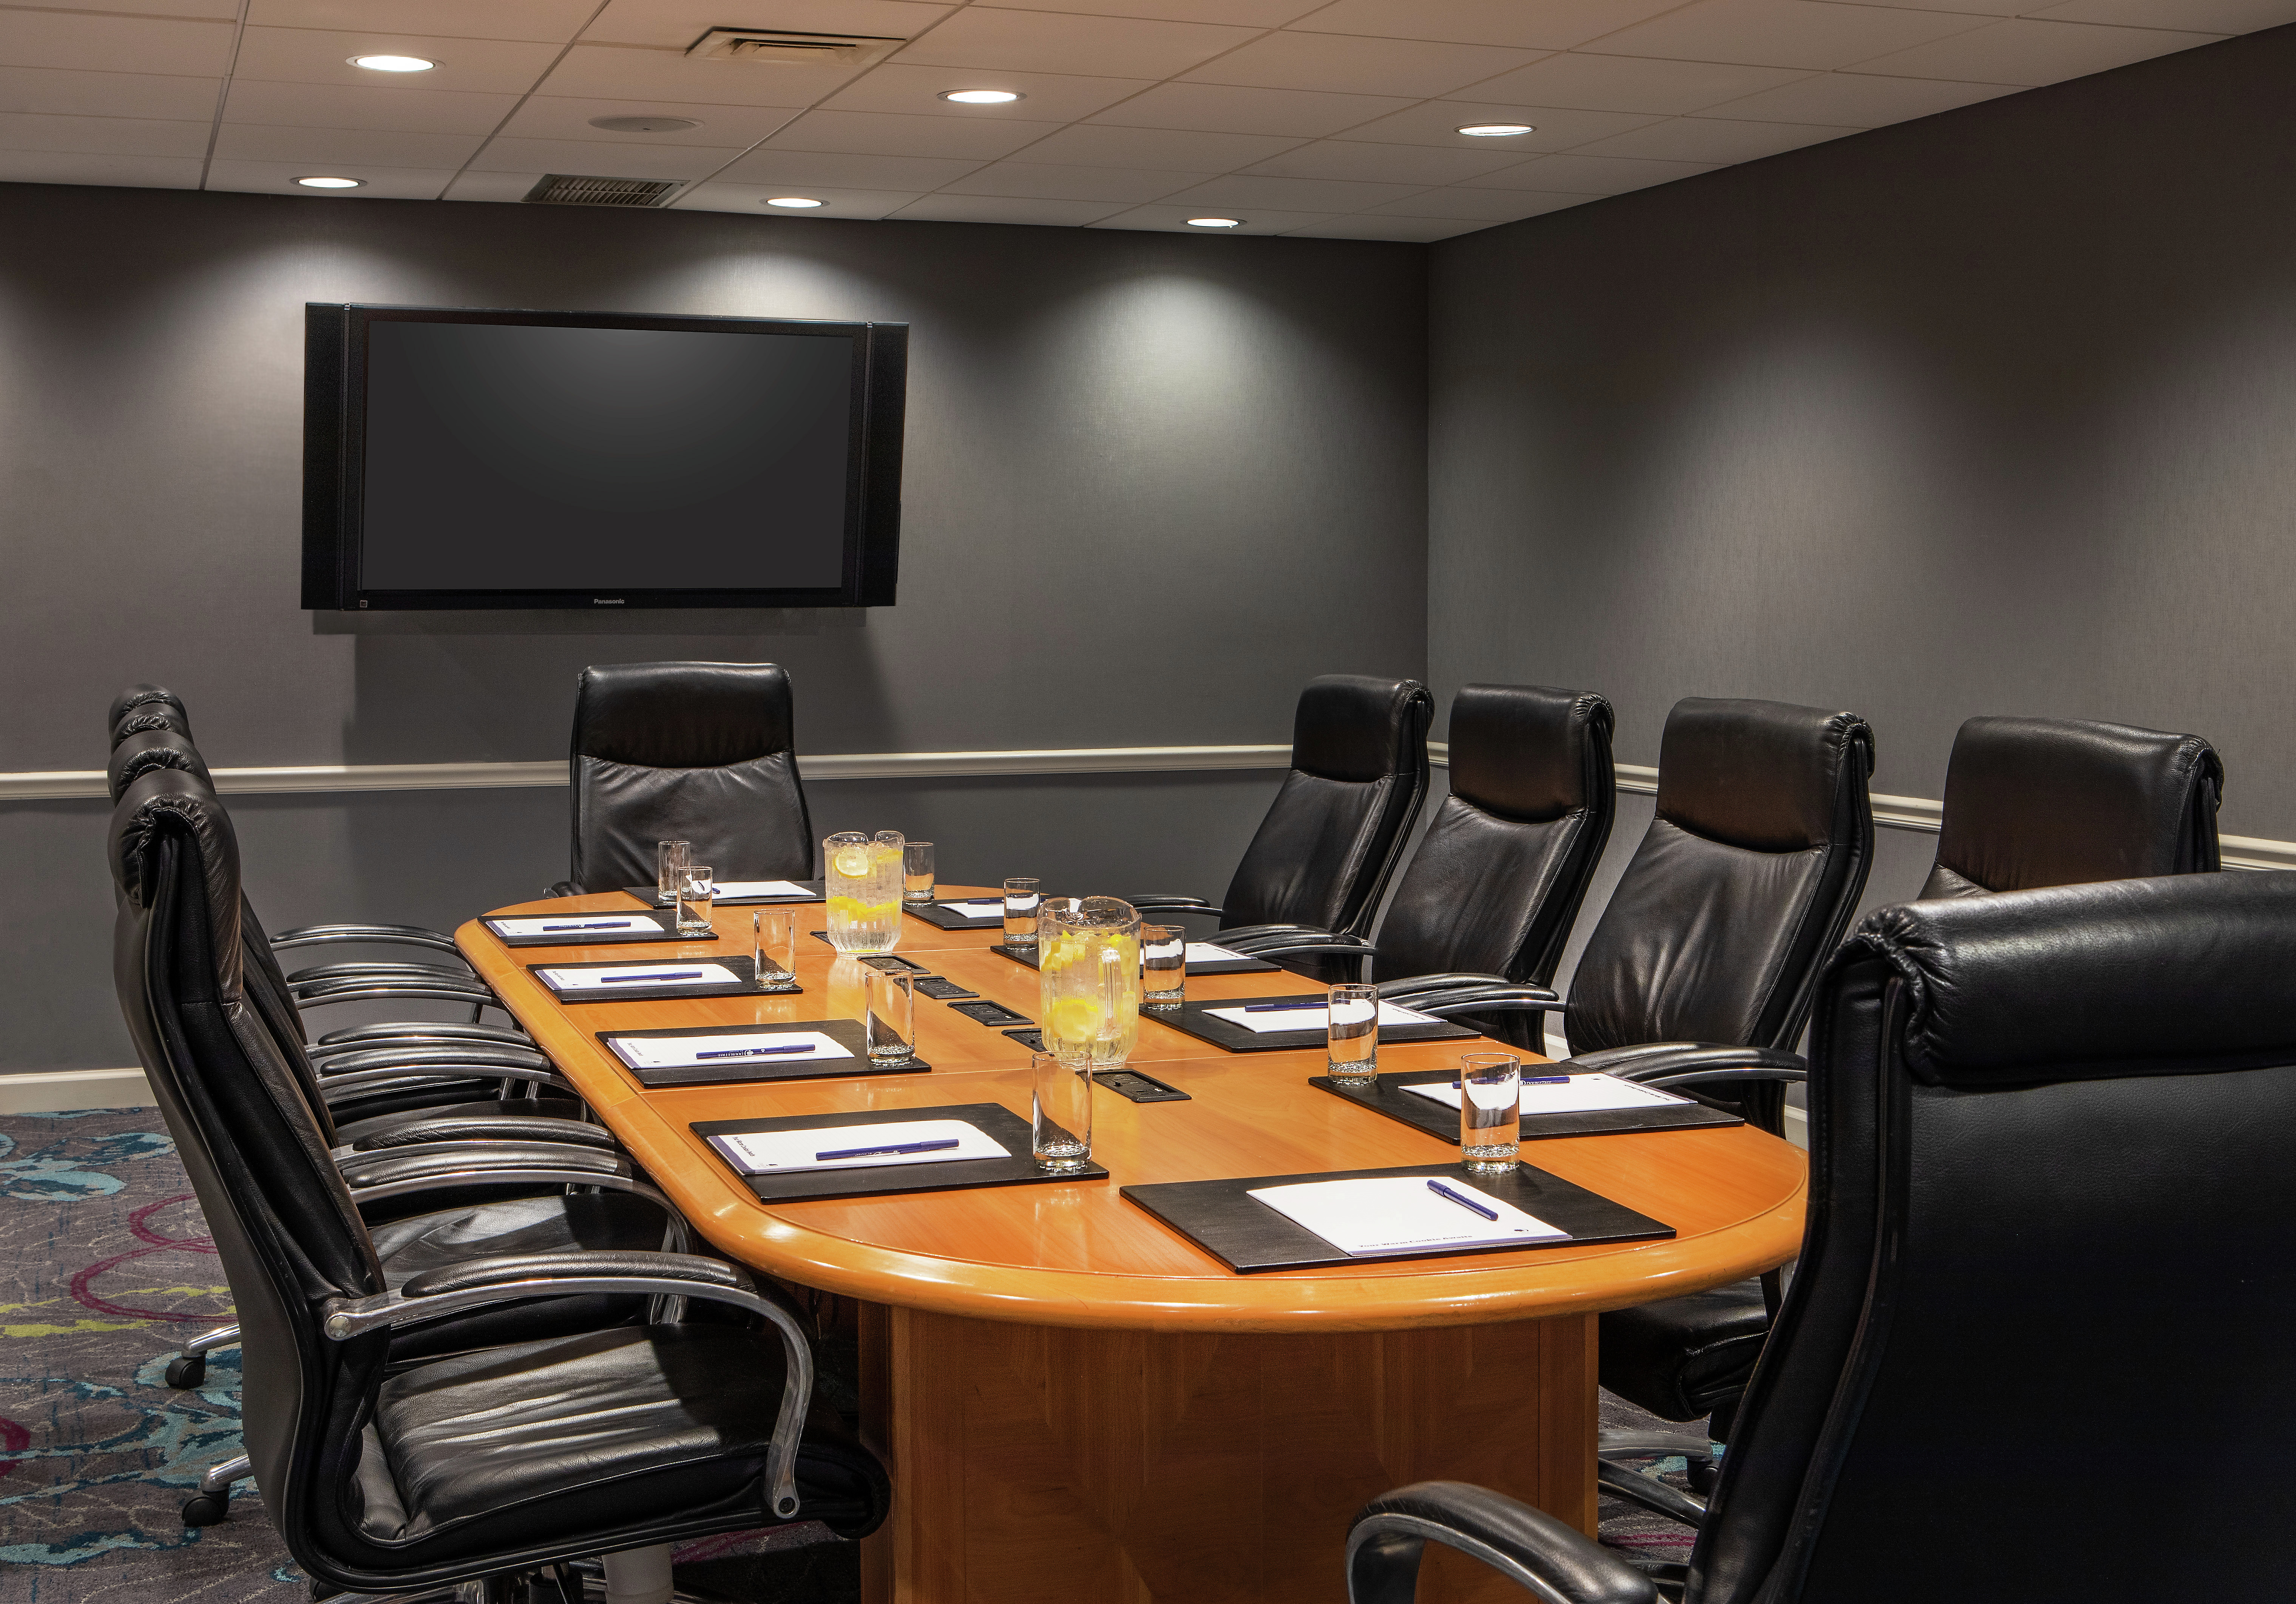 Our Howard Boardroom is Perfect for Productive Meetings to Re-Energize Your Team